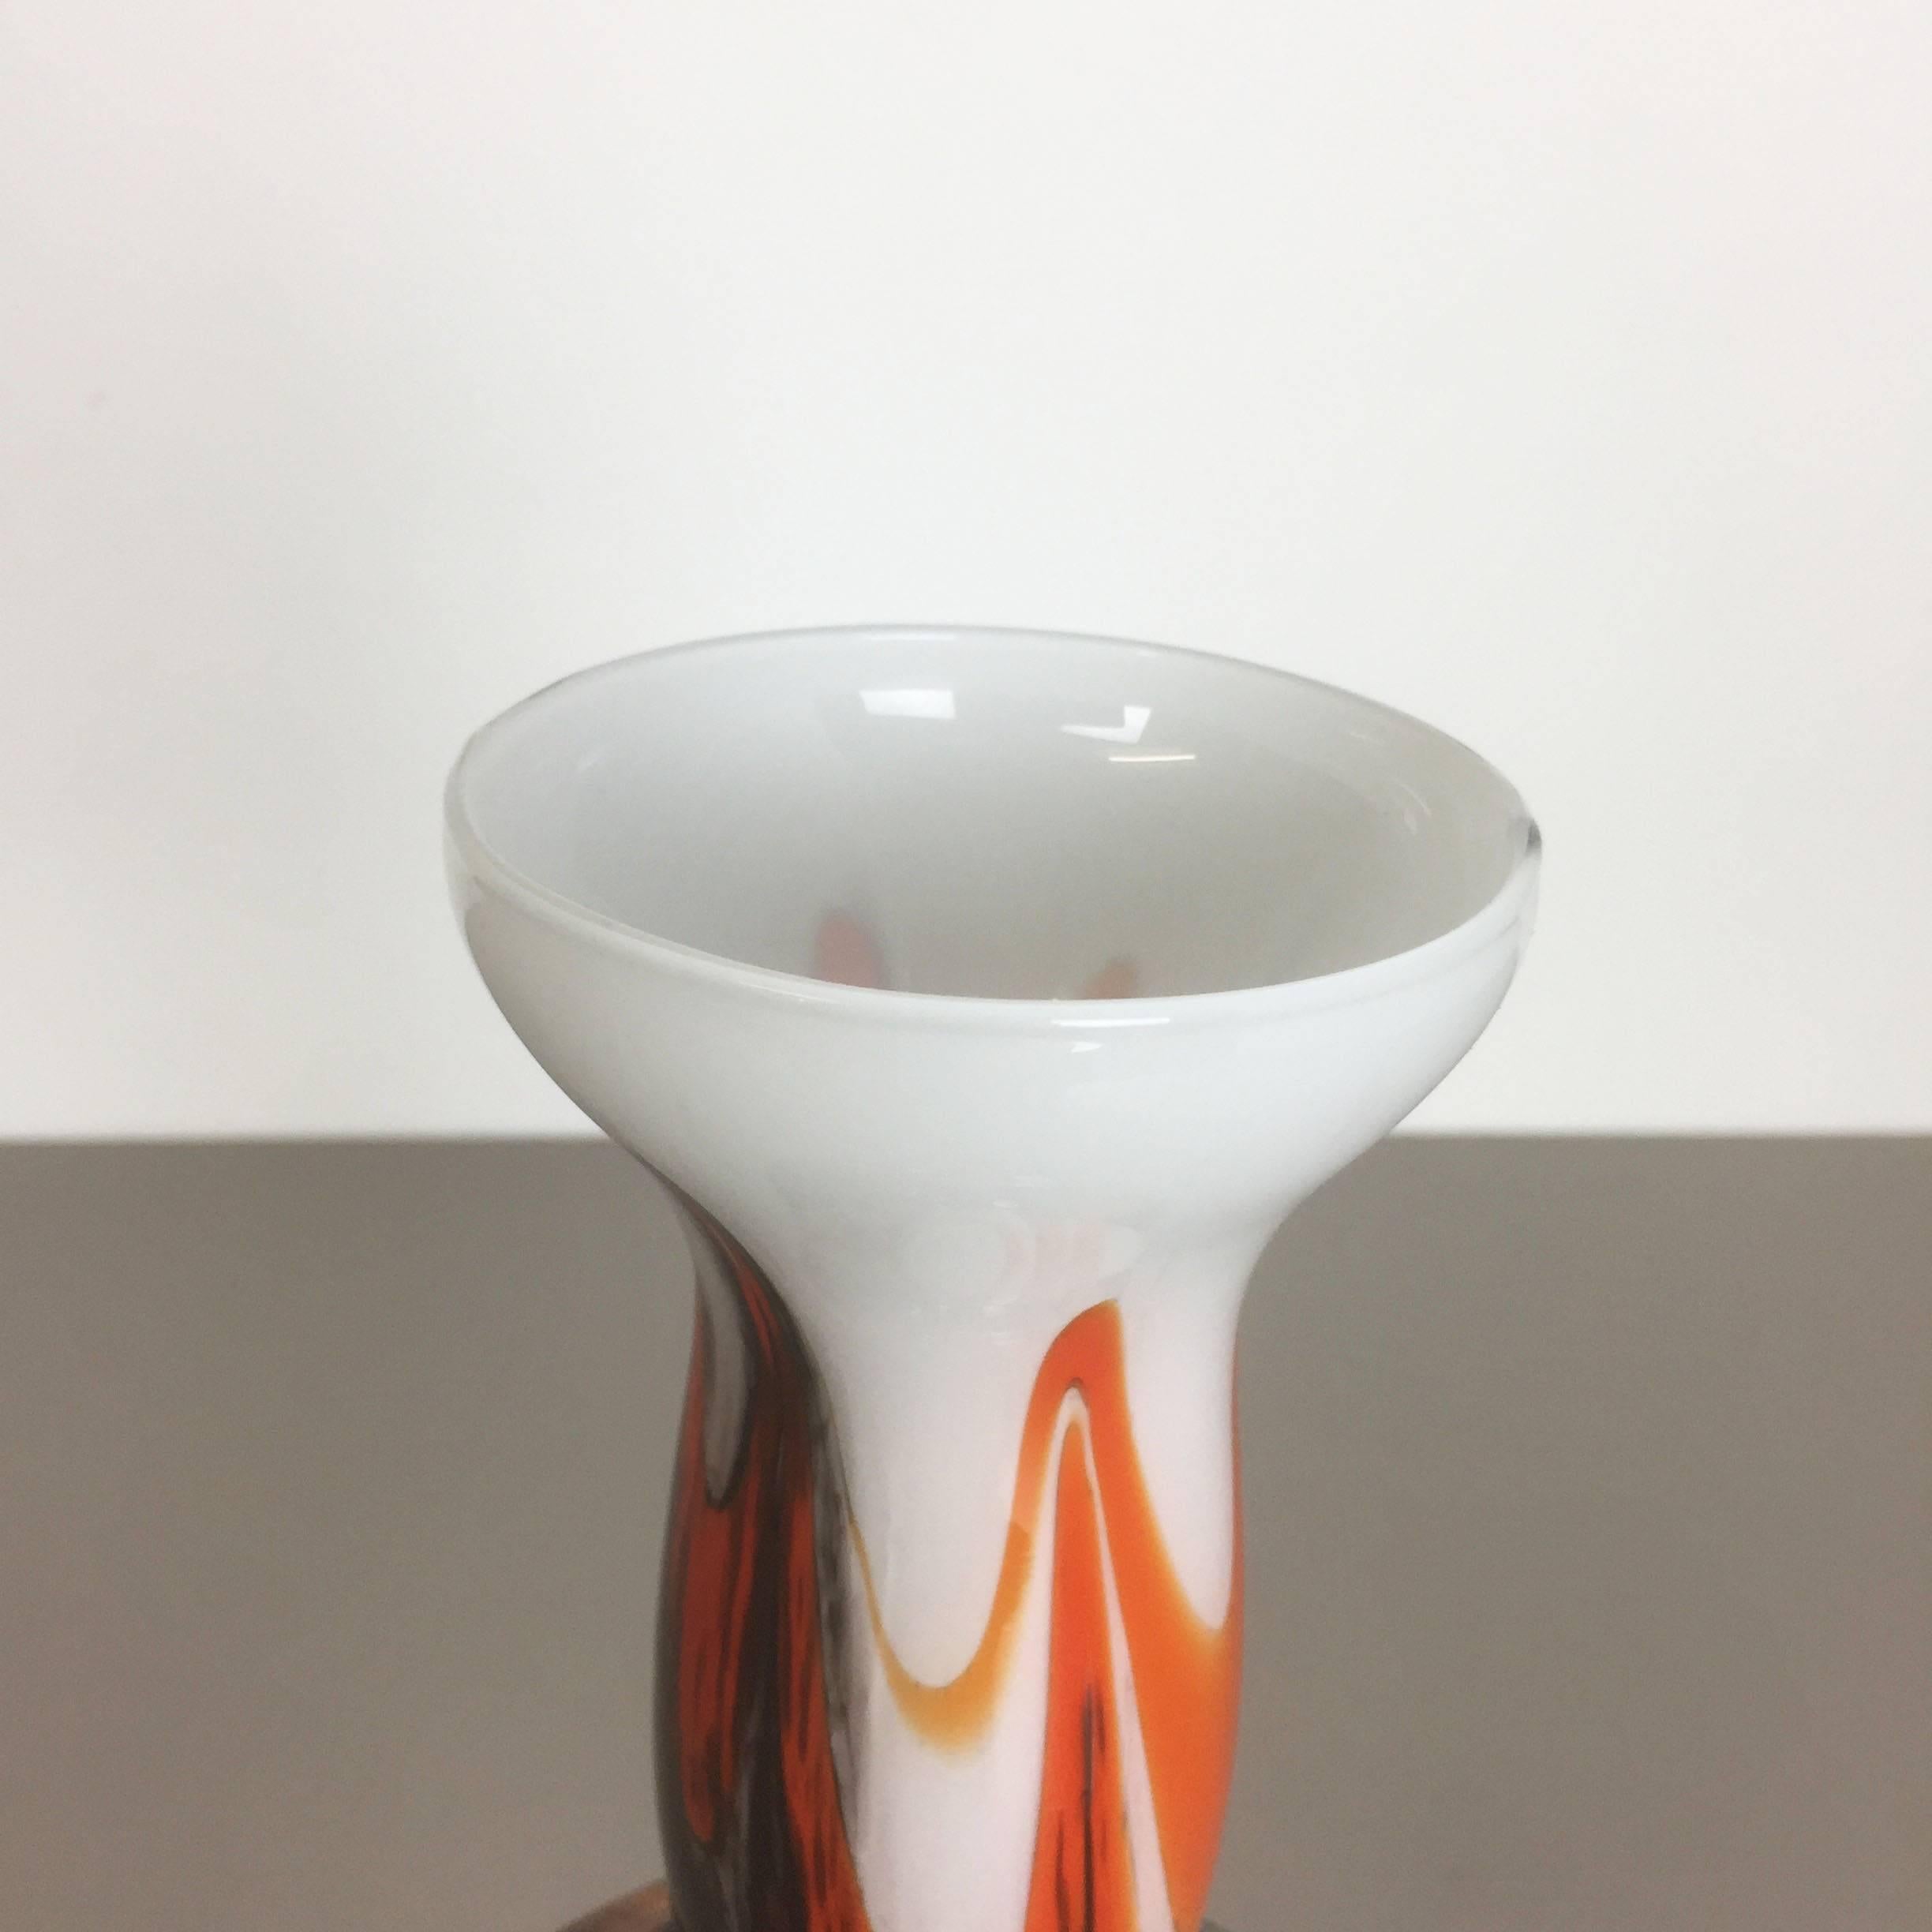 Vintage 1970s Opaline Florence Vase Designed by Carlo Moretti, Italy In Good Condition For Sale In Kirchlengern, DE